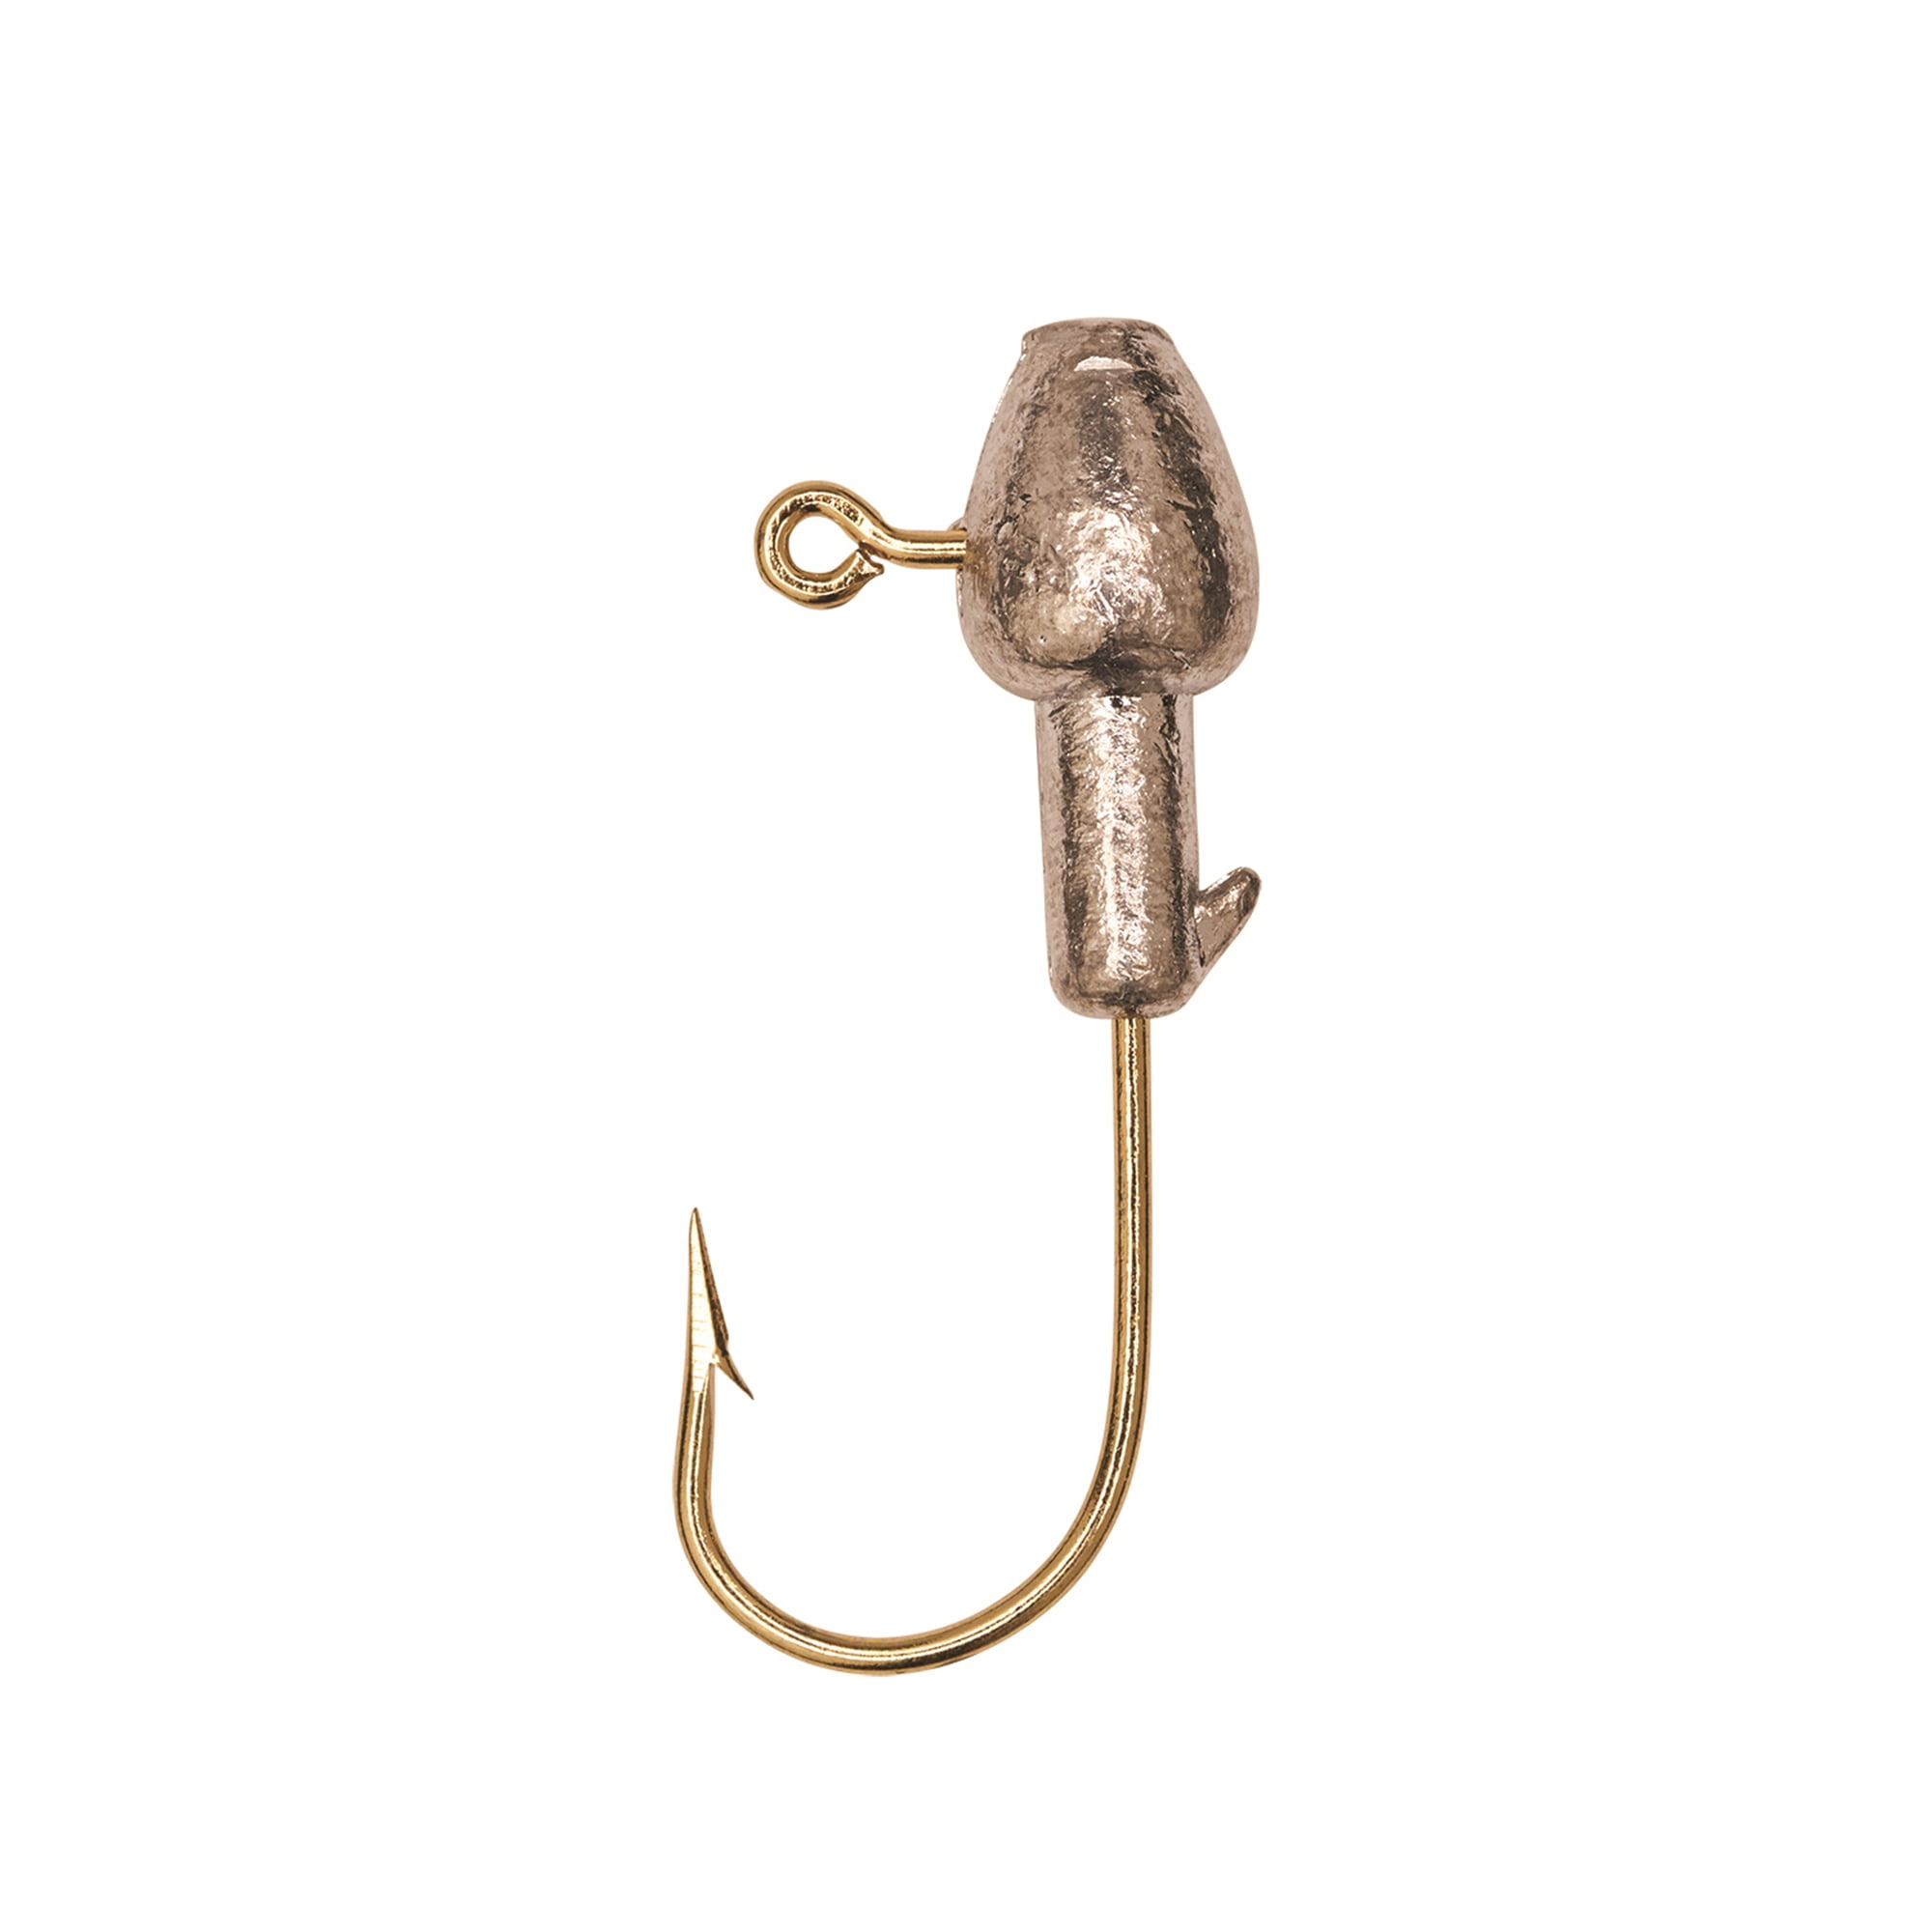 Eagle Claw Panfish Dart Head Jig Hook - Gold & Unpainted - 1/16-Ounce - 10 ct